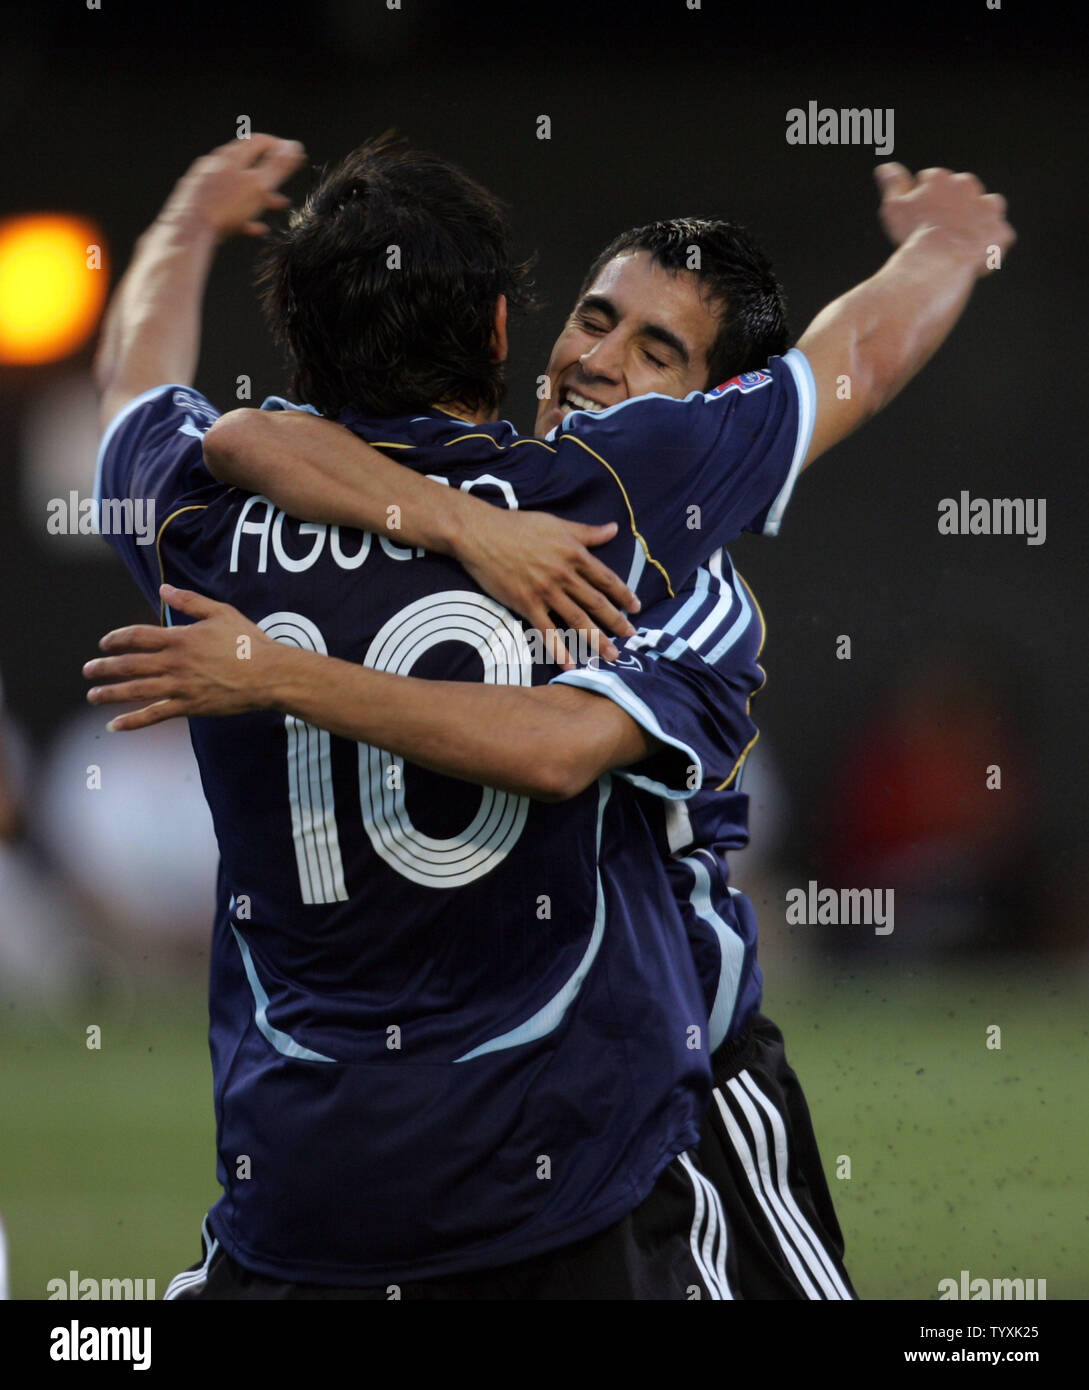 Argentina's Maximiliano Moralez (R) hugs a teammate Sergio Aguero after scoring against Panama during the first half of the FIFA Under-20 World Cup match at Frank Clair Stadium in Ottawa, Canada on July 3, 2007. (UPI Photo/Grace Chiu). Stock Photo